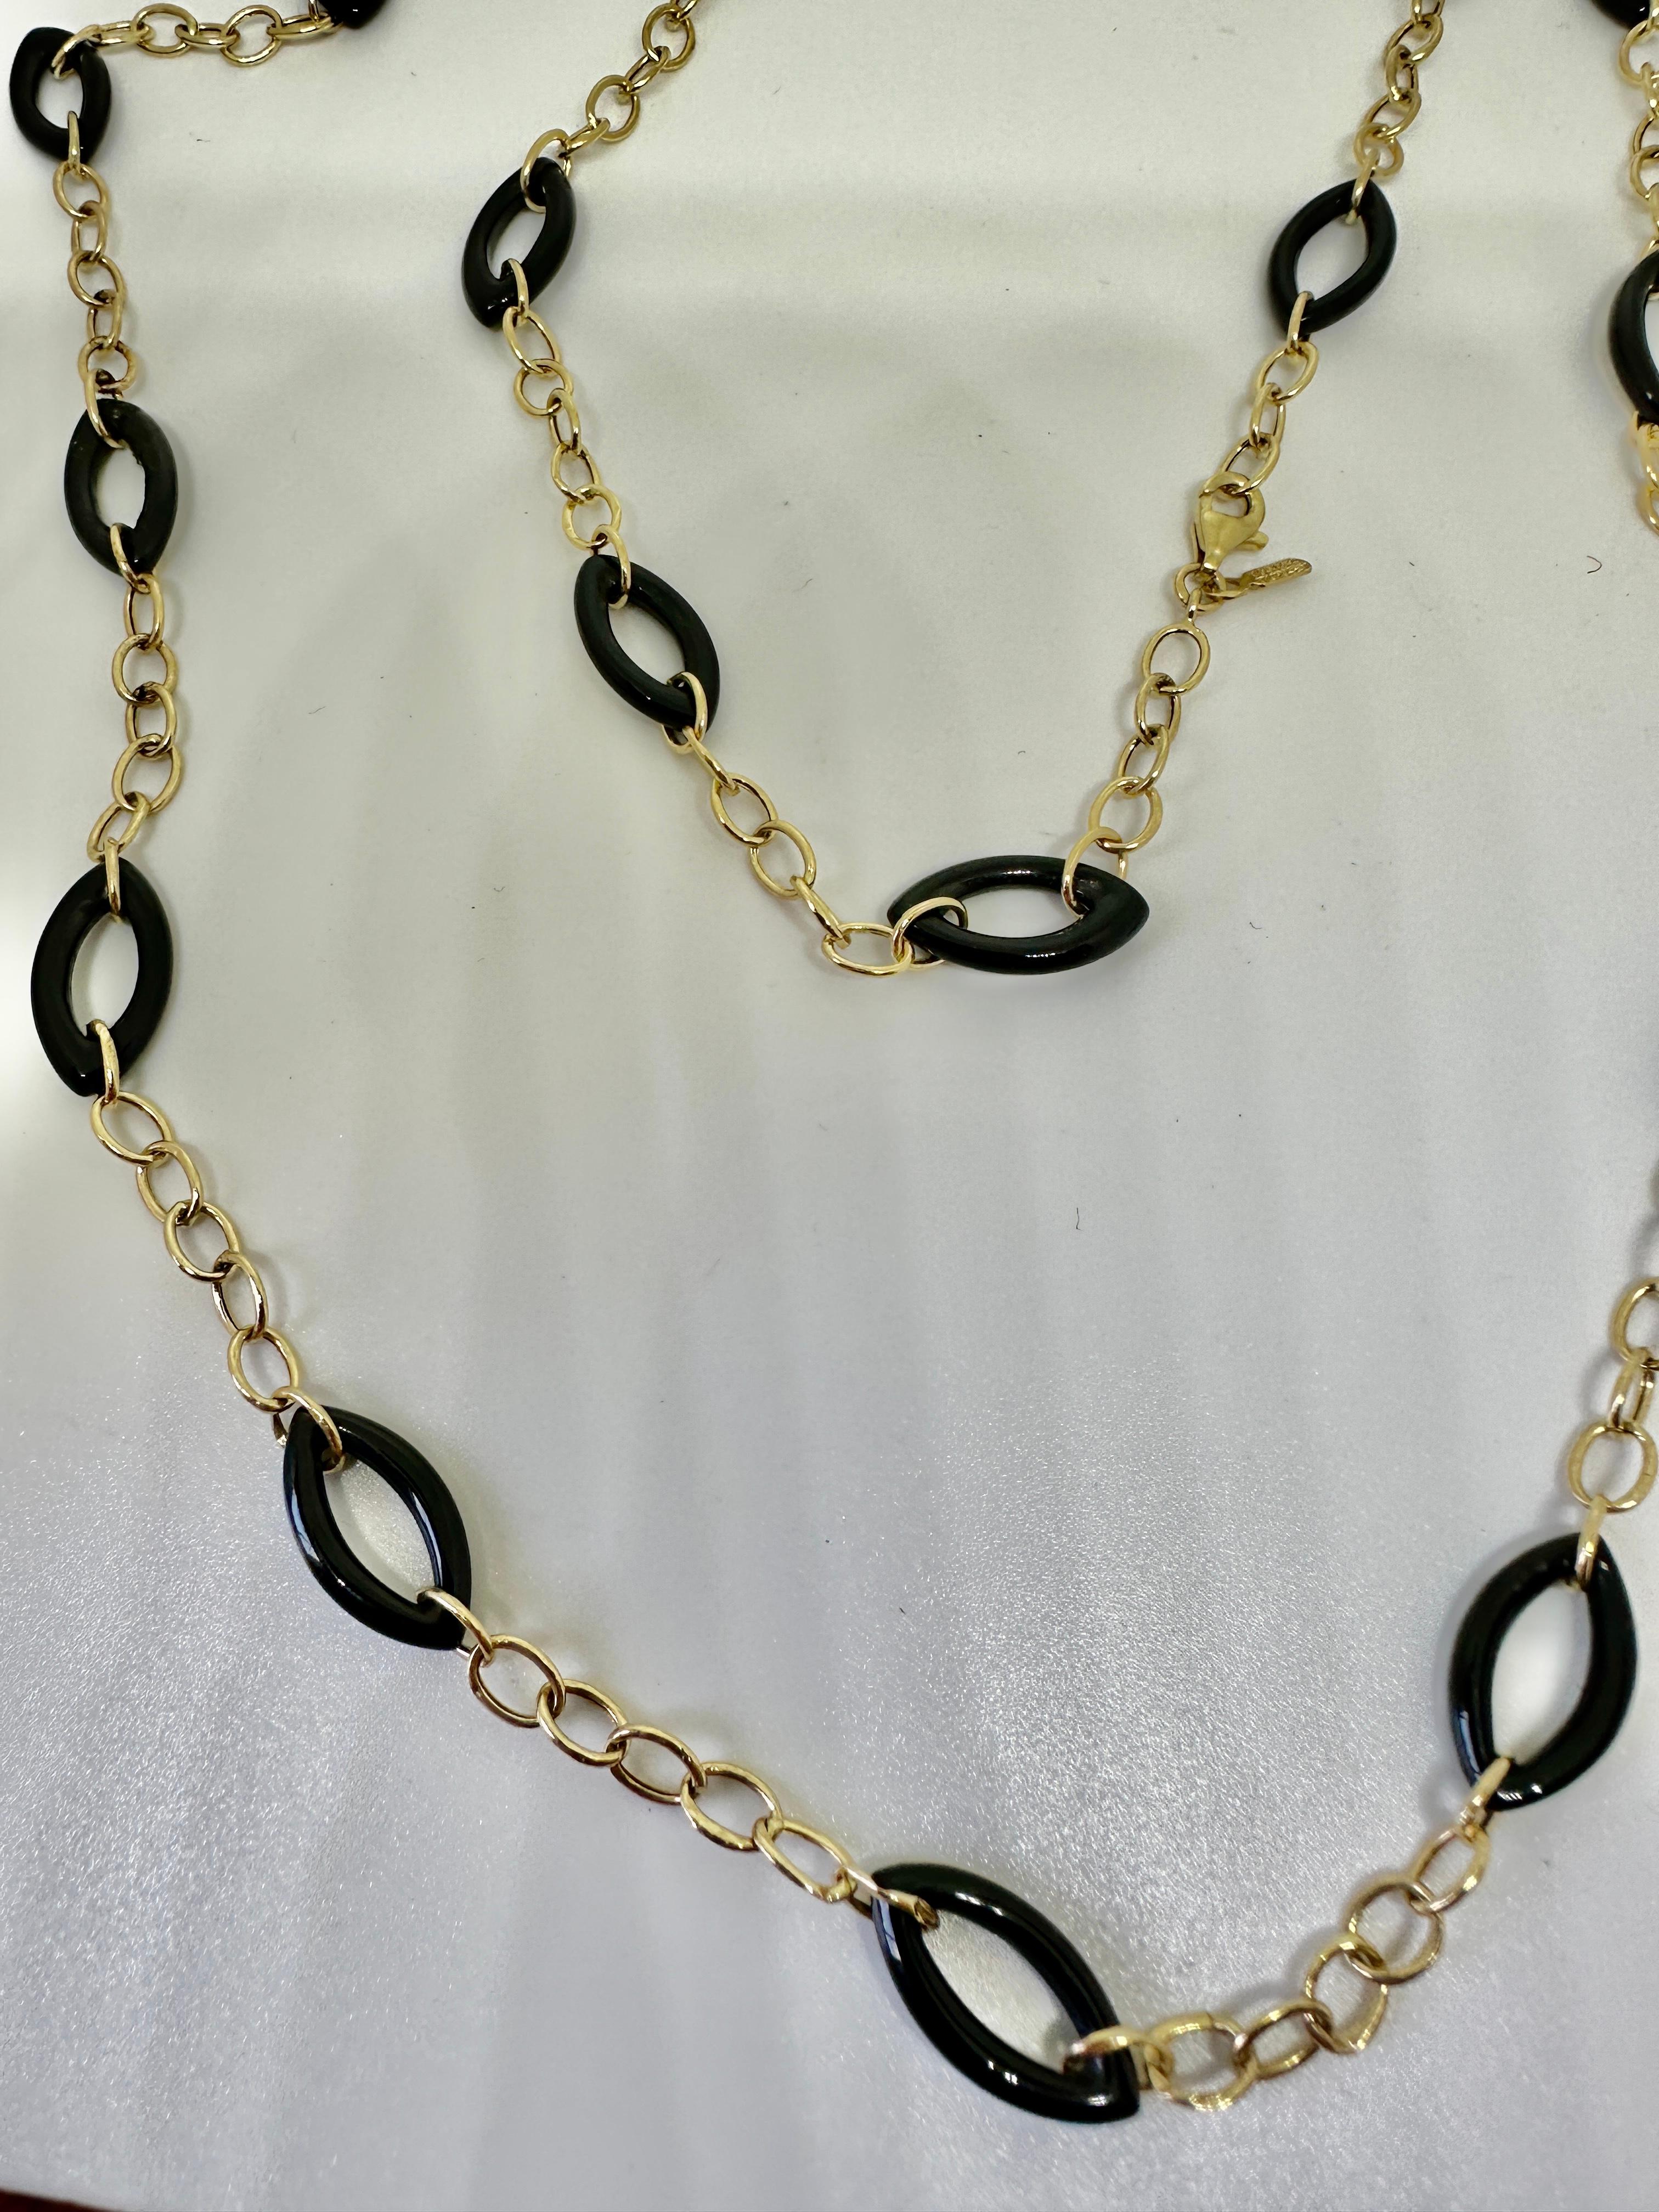 Black Coral 14 Karat Gold Necklace 36 Inches Chain Link Necklace For Sale 2